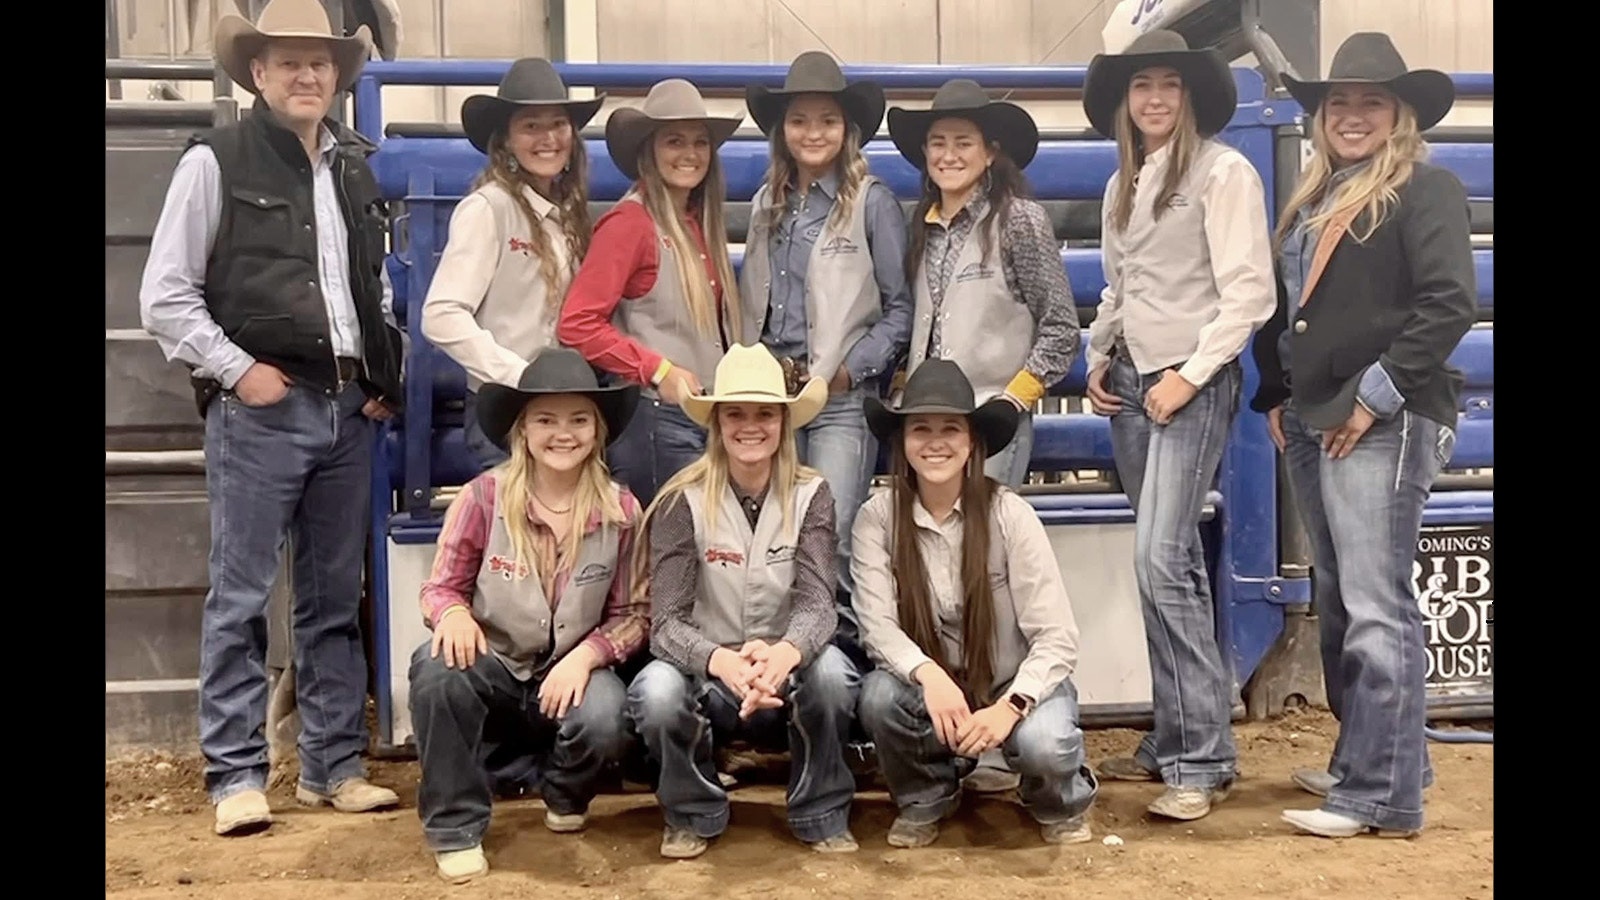 The 2023 Gillette College women's rodeo team, from left, back: head coach Will LaDuke, Haiden Thompson, Staheli Adams, Bradie Crouse, Layni Stevens, Maddie Eskew and assistant coach Casey Sellers. Front: Jaycie West, Erin McGinley and Ellie Bard.